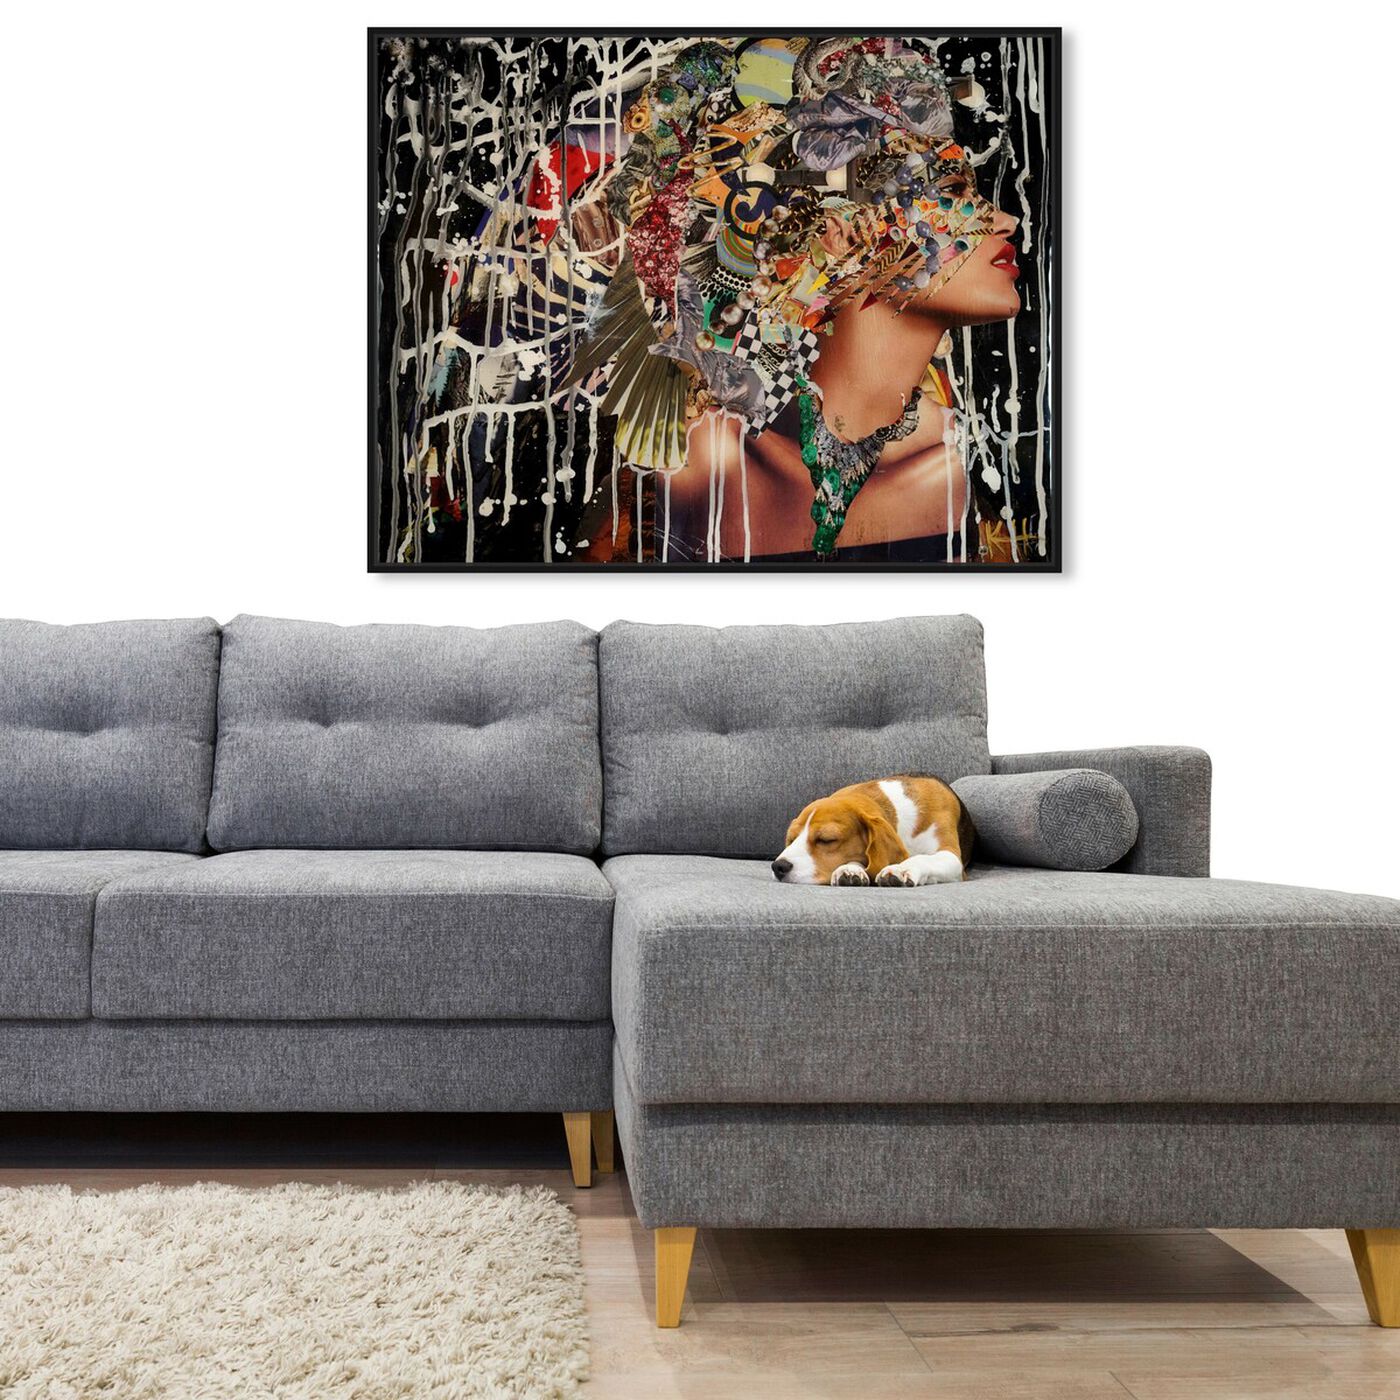 Hanging view of Katy Hirschfeld - Tribal and Wild featuring fashion and glam and portraits art.